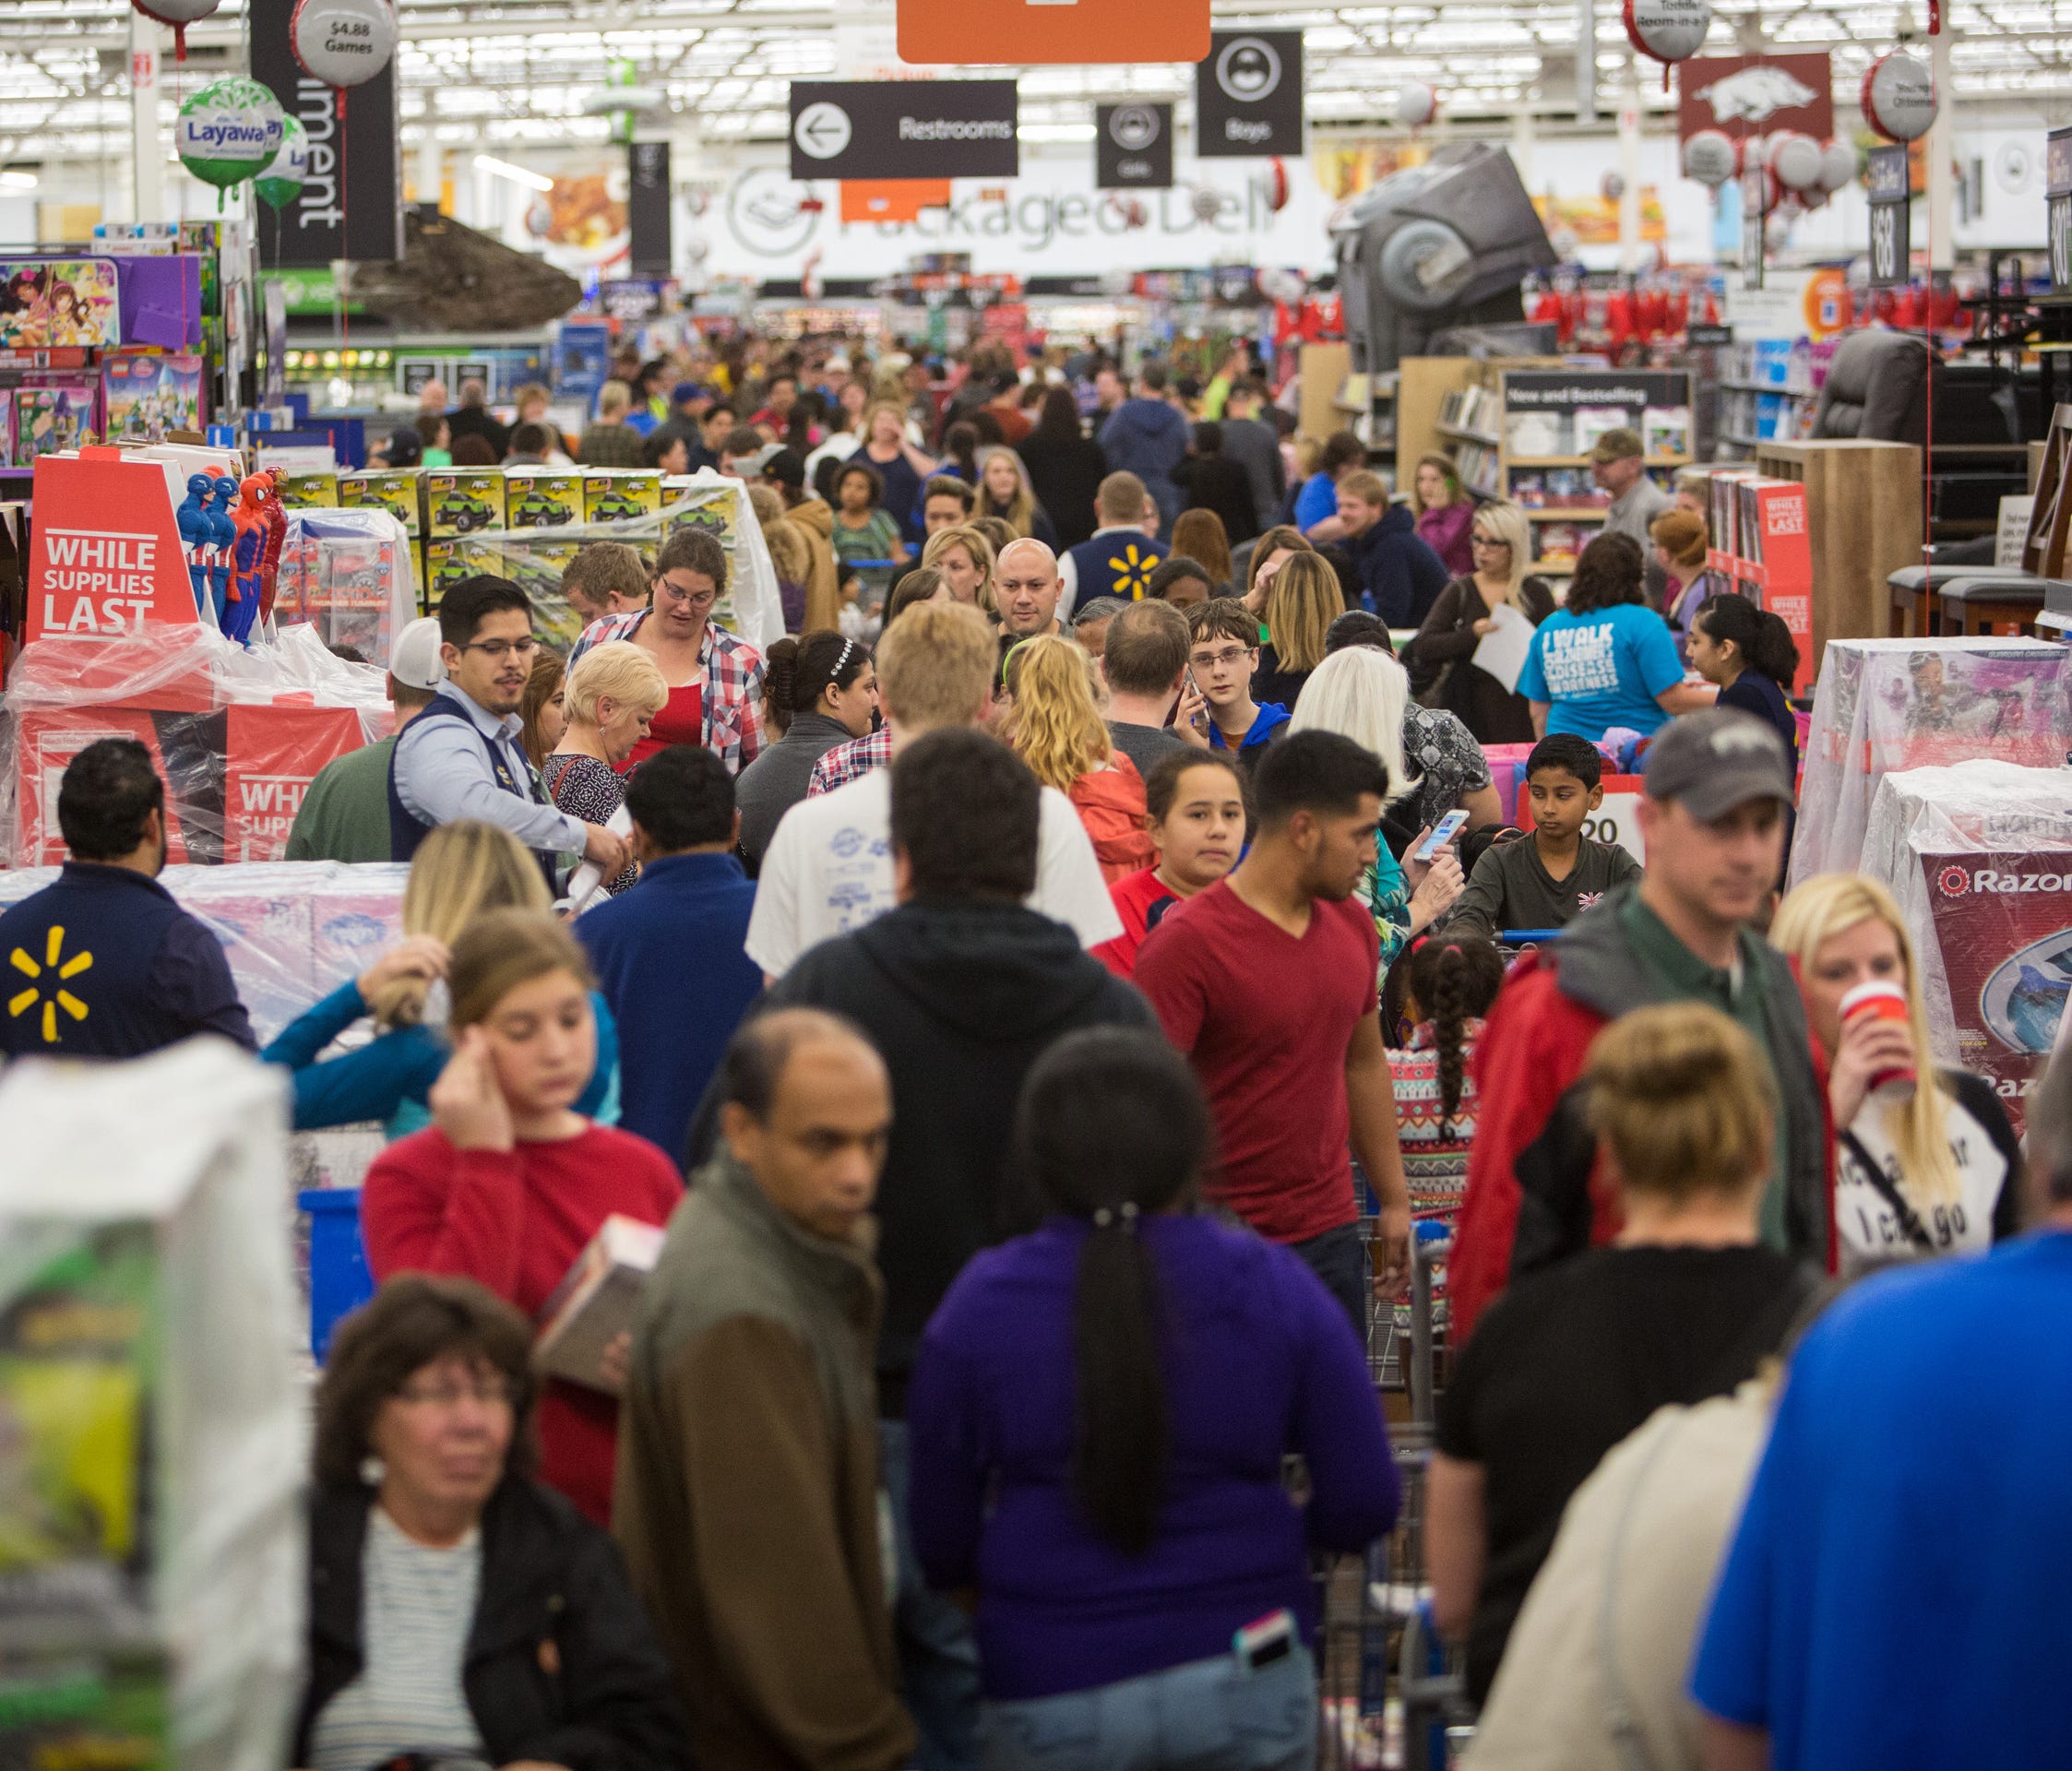 Customers save big at Walmart's Black Friday shopping event in Rogers, Ark. Hundreds of customers at Walmart stores across the country took advantage of deals on top items, like televisions, video game consoles, and toys. Easy shopping continues in W